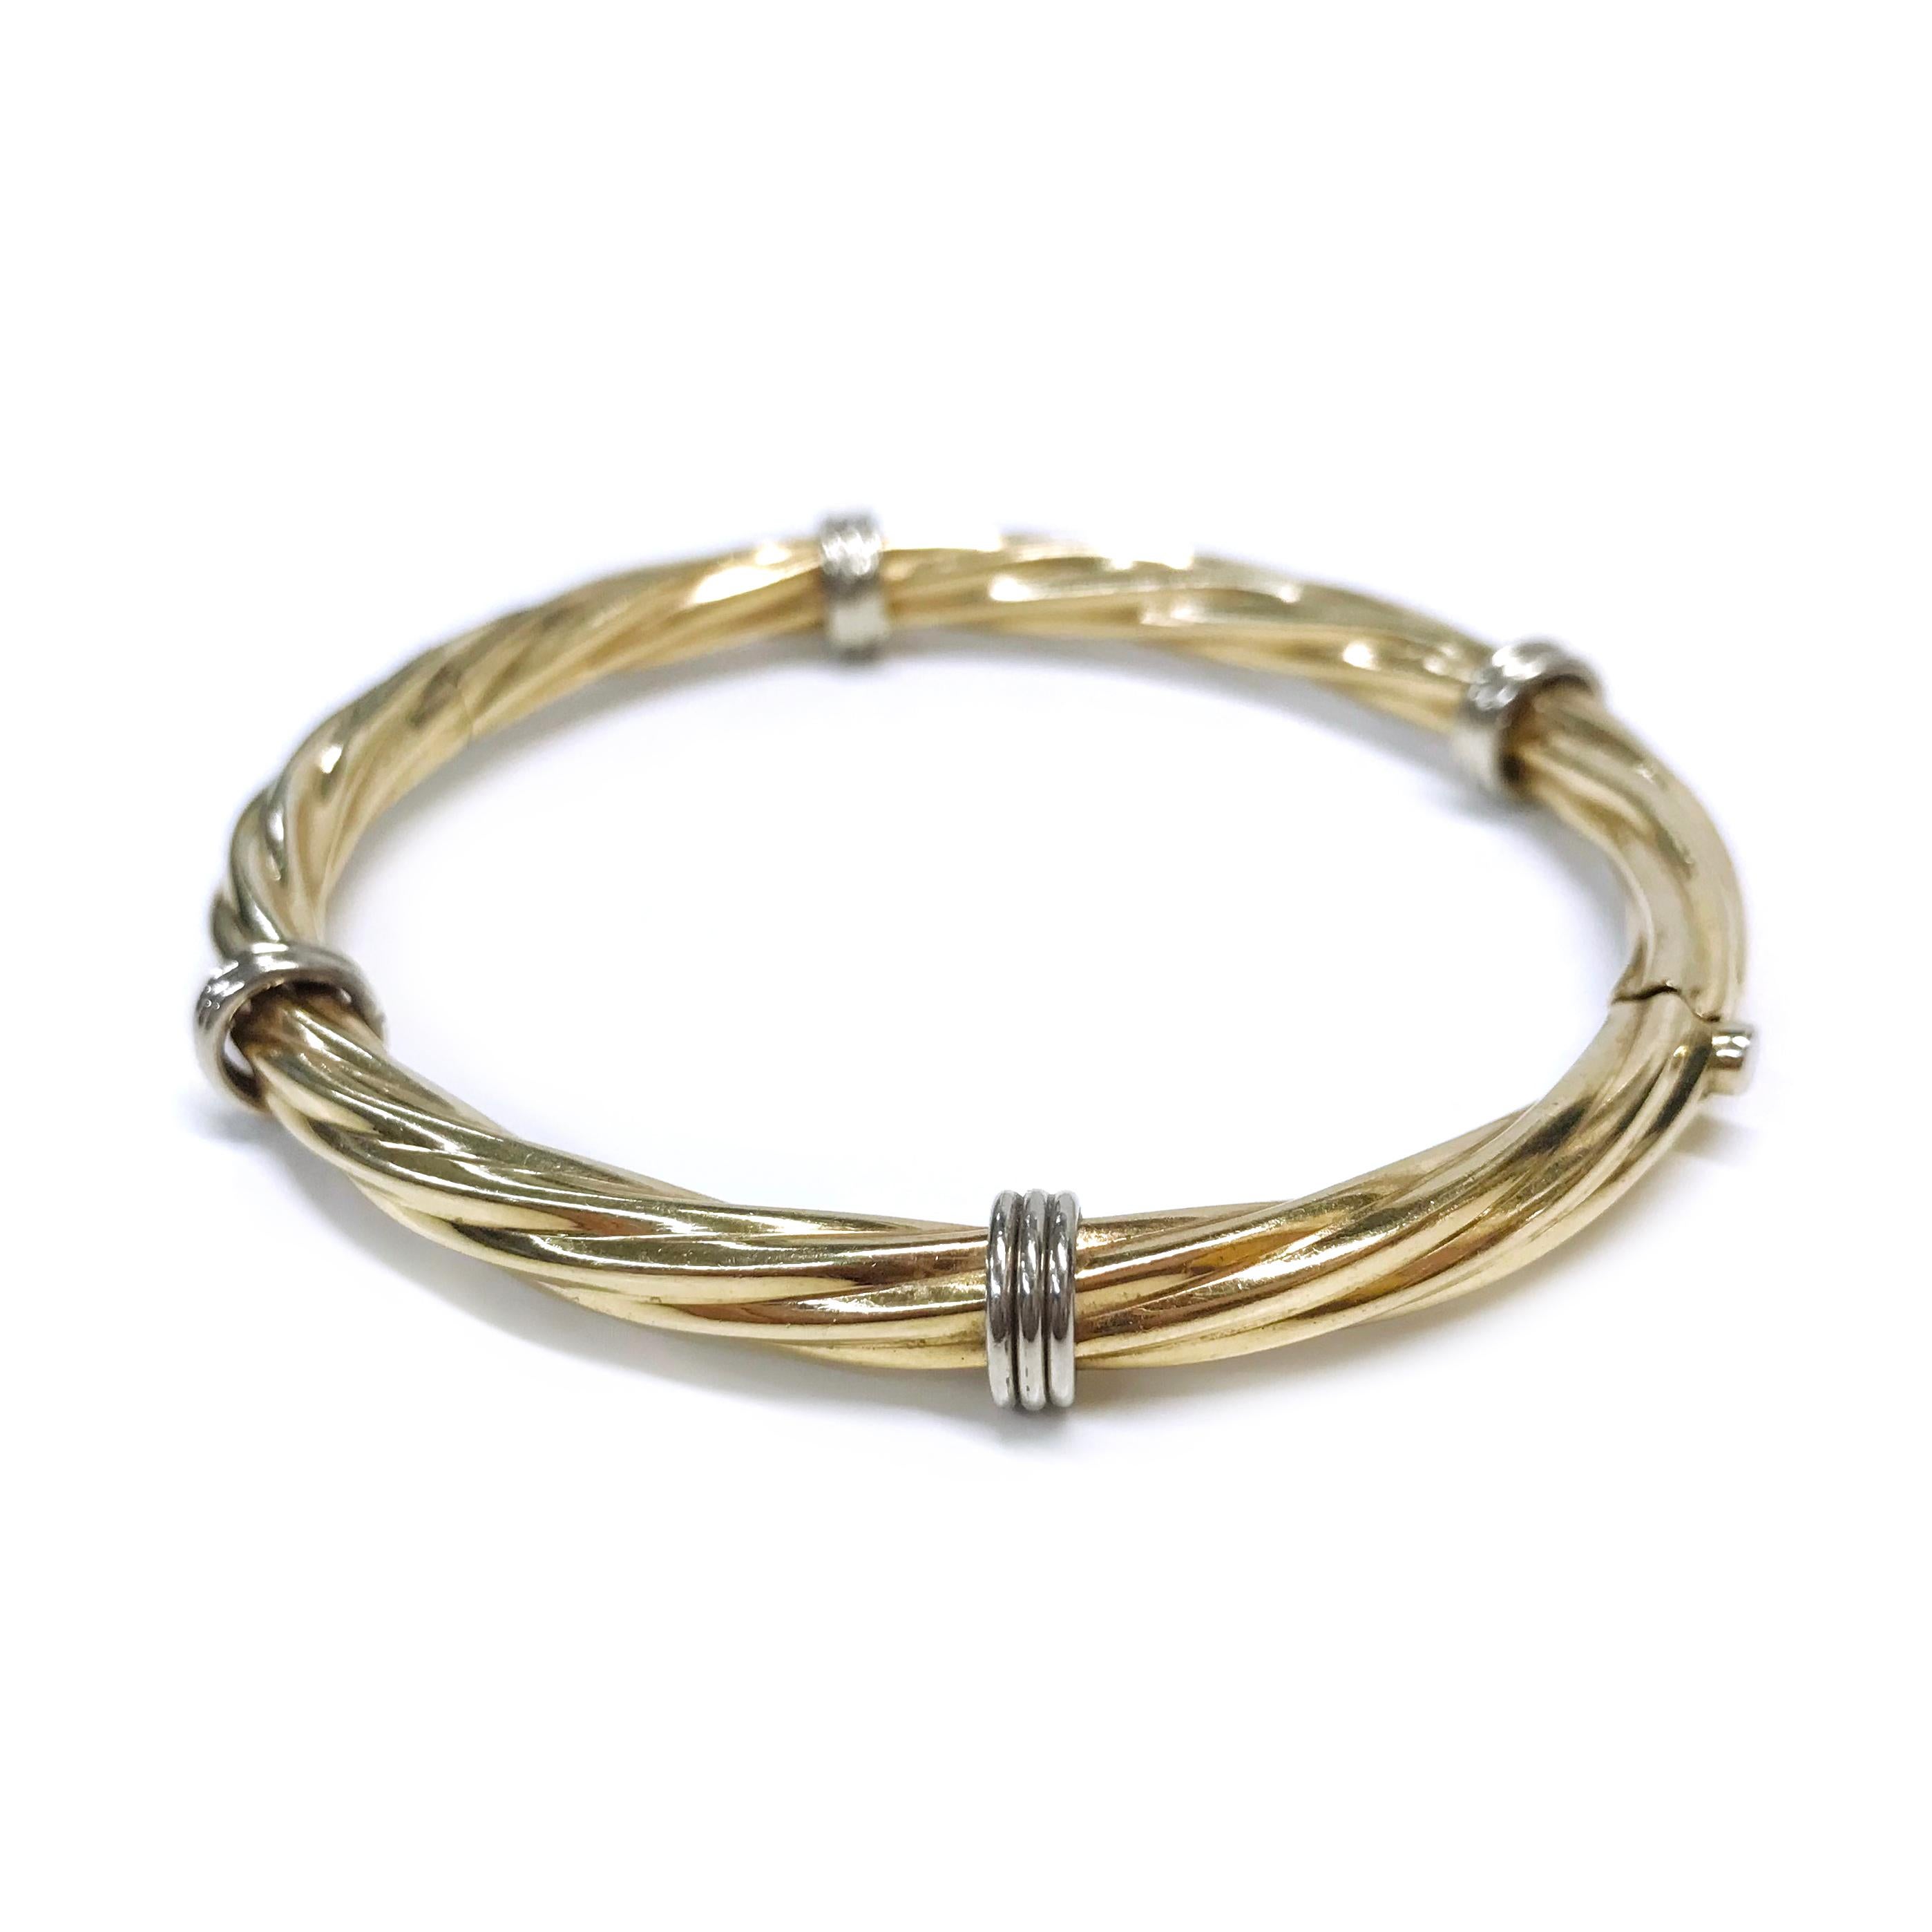 14 Karat two-toned Hinged Cable Bangle Bracelet. A classic yellow gold cable bangle with four white gold circular gold bars. The bangle measures 2.5mm wide and has a circumference of 7 3/4